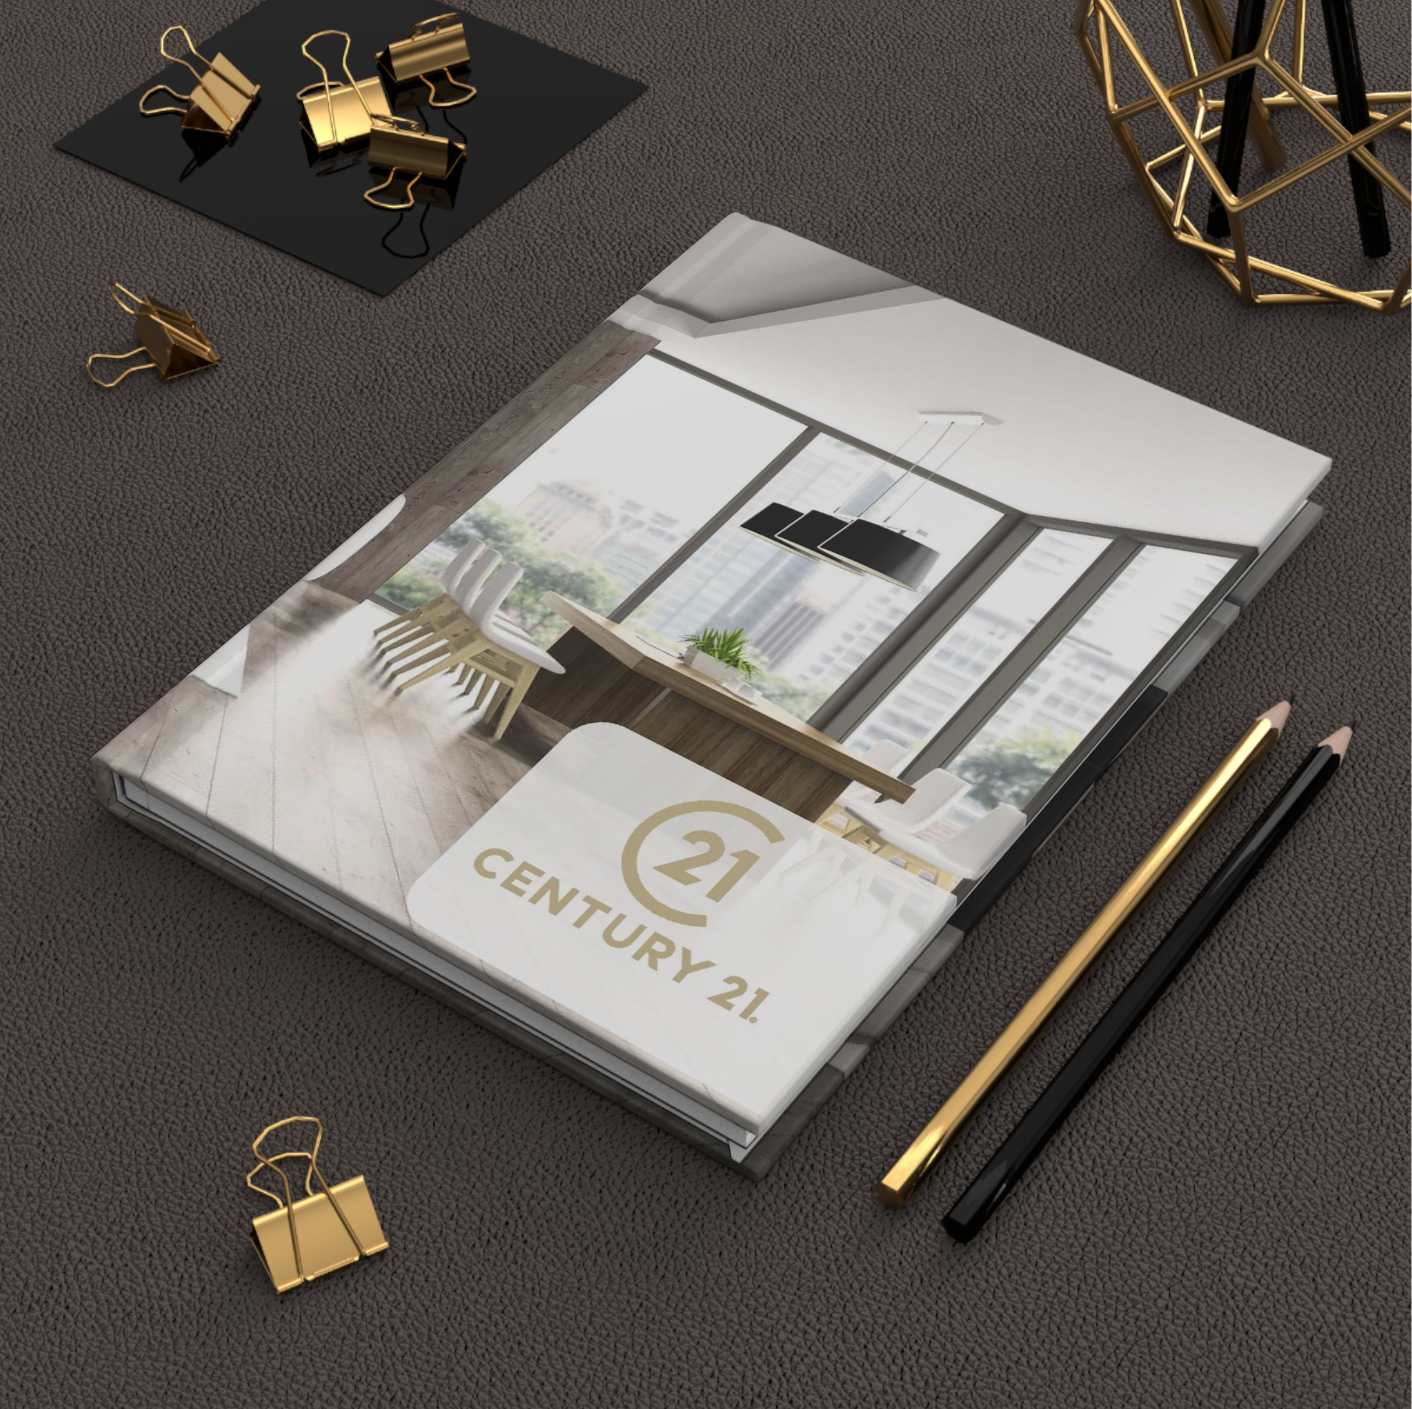 Century 21 Full Color Hardcover Binders Luxury (from as low as $10.46 per cover)